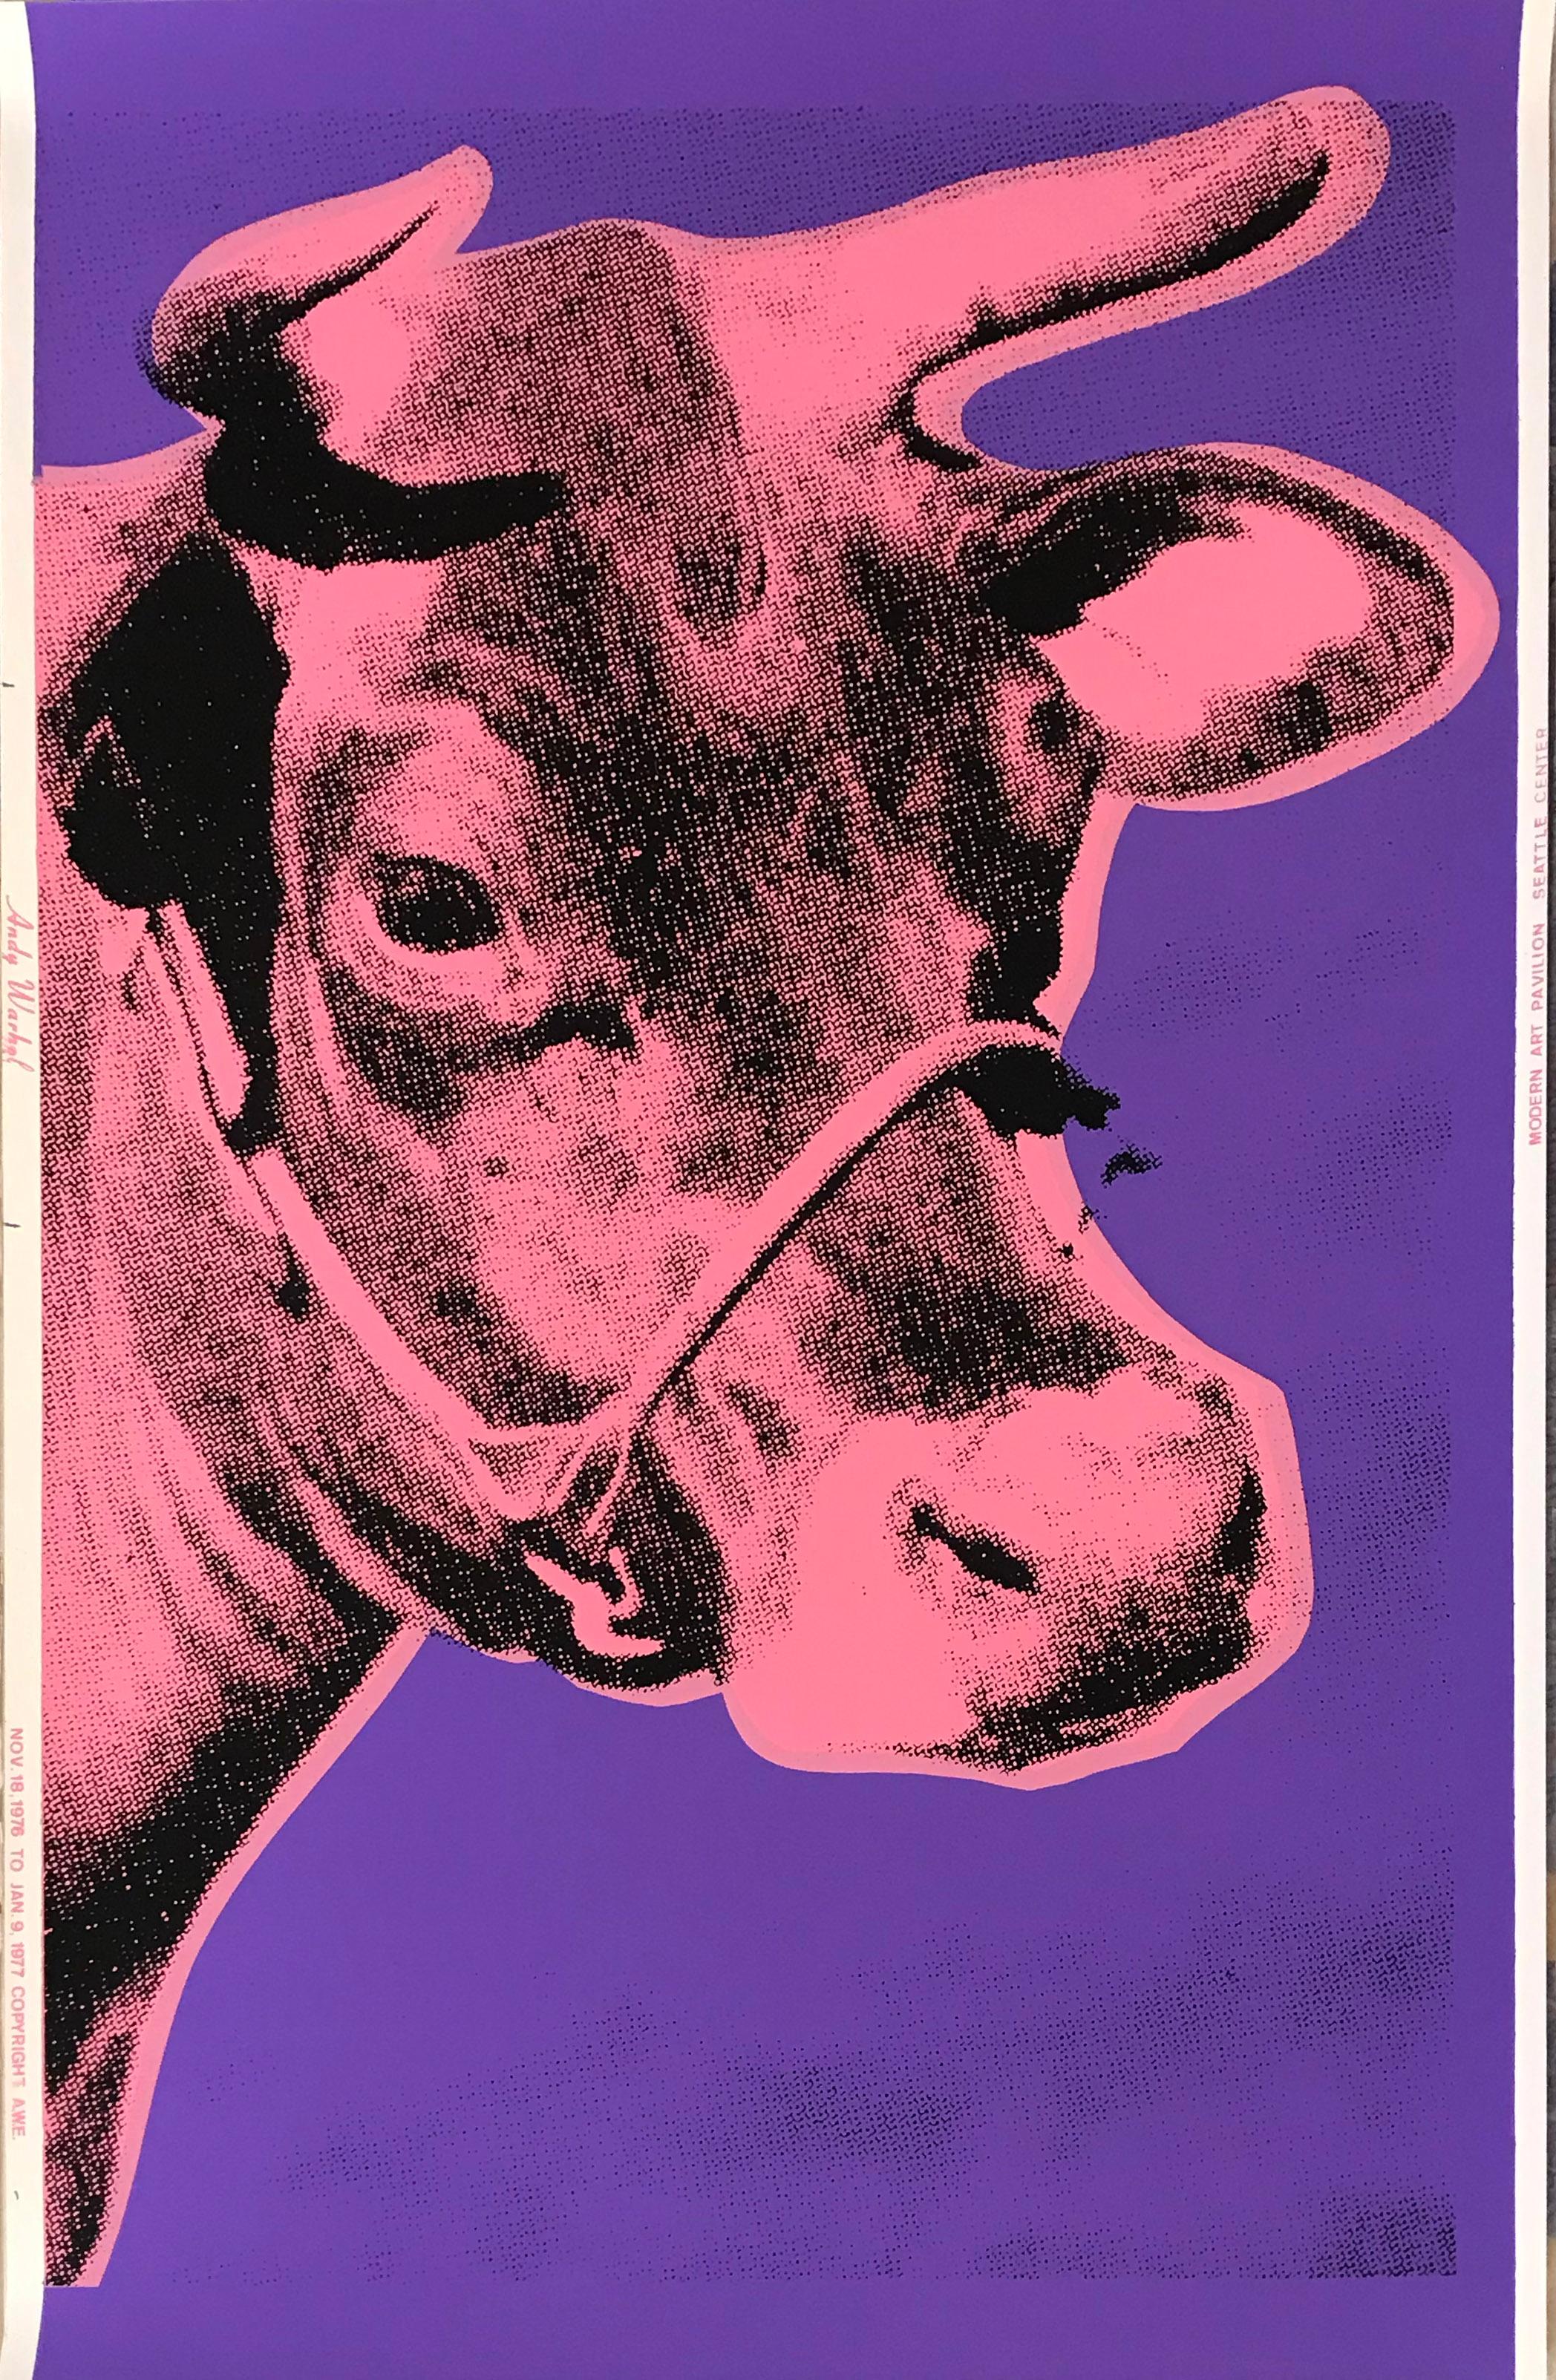 Andy Warhol Andy Warhol Cow 1976 Screenprint On Wallpaper 45 5 X 29 3 4 Authenticated For Sale At 1stdibs